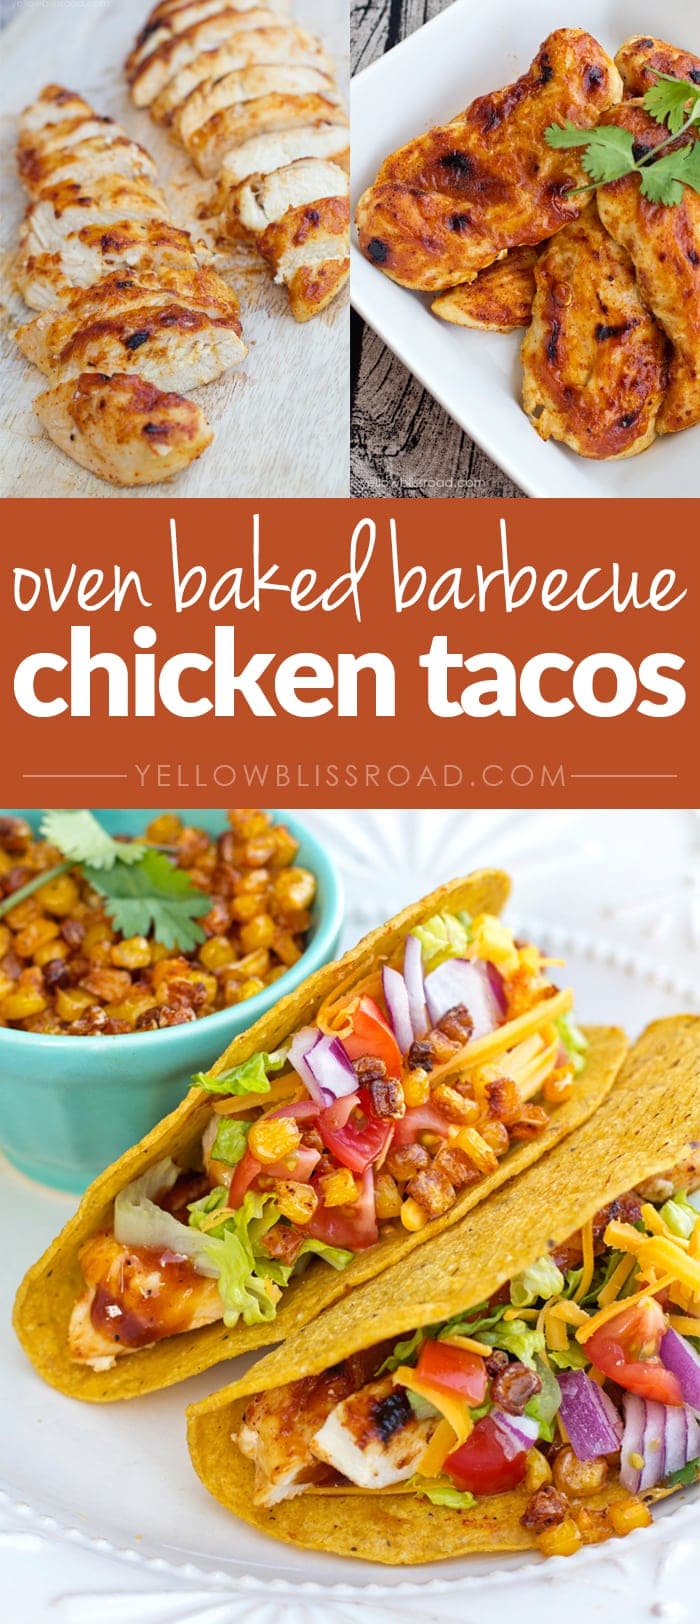 Oven Baked Barbecue Chicken Tacos - Yellow Bliss Road